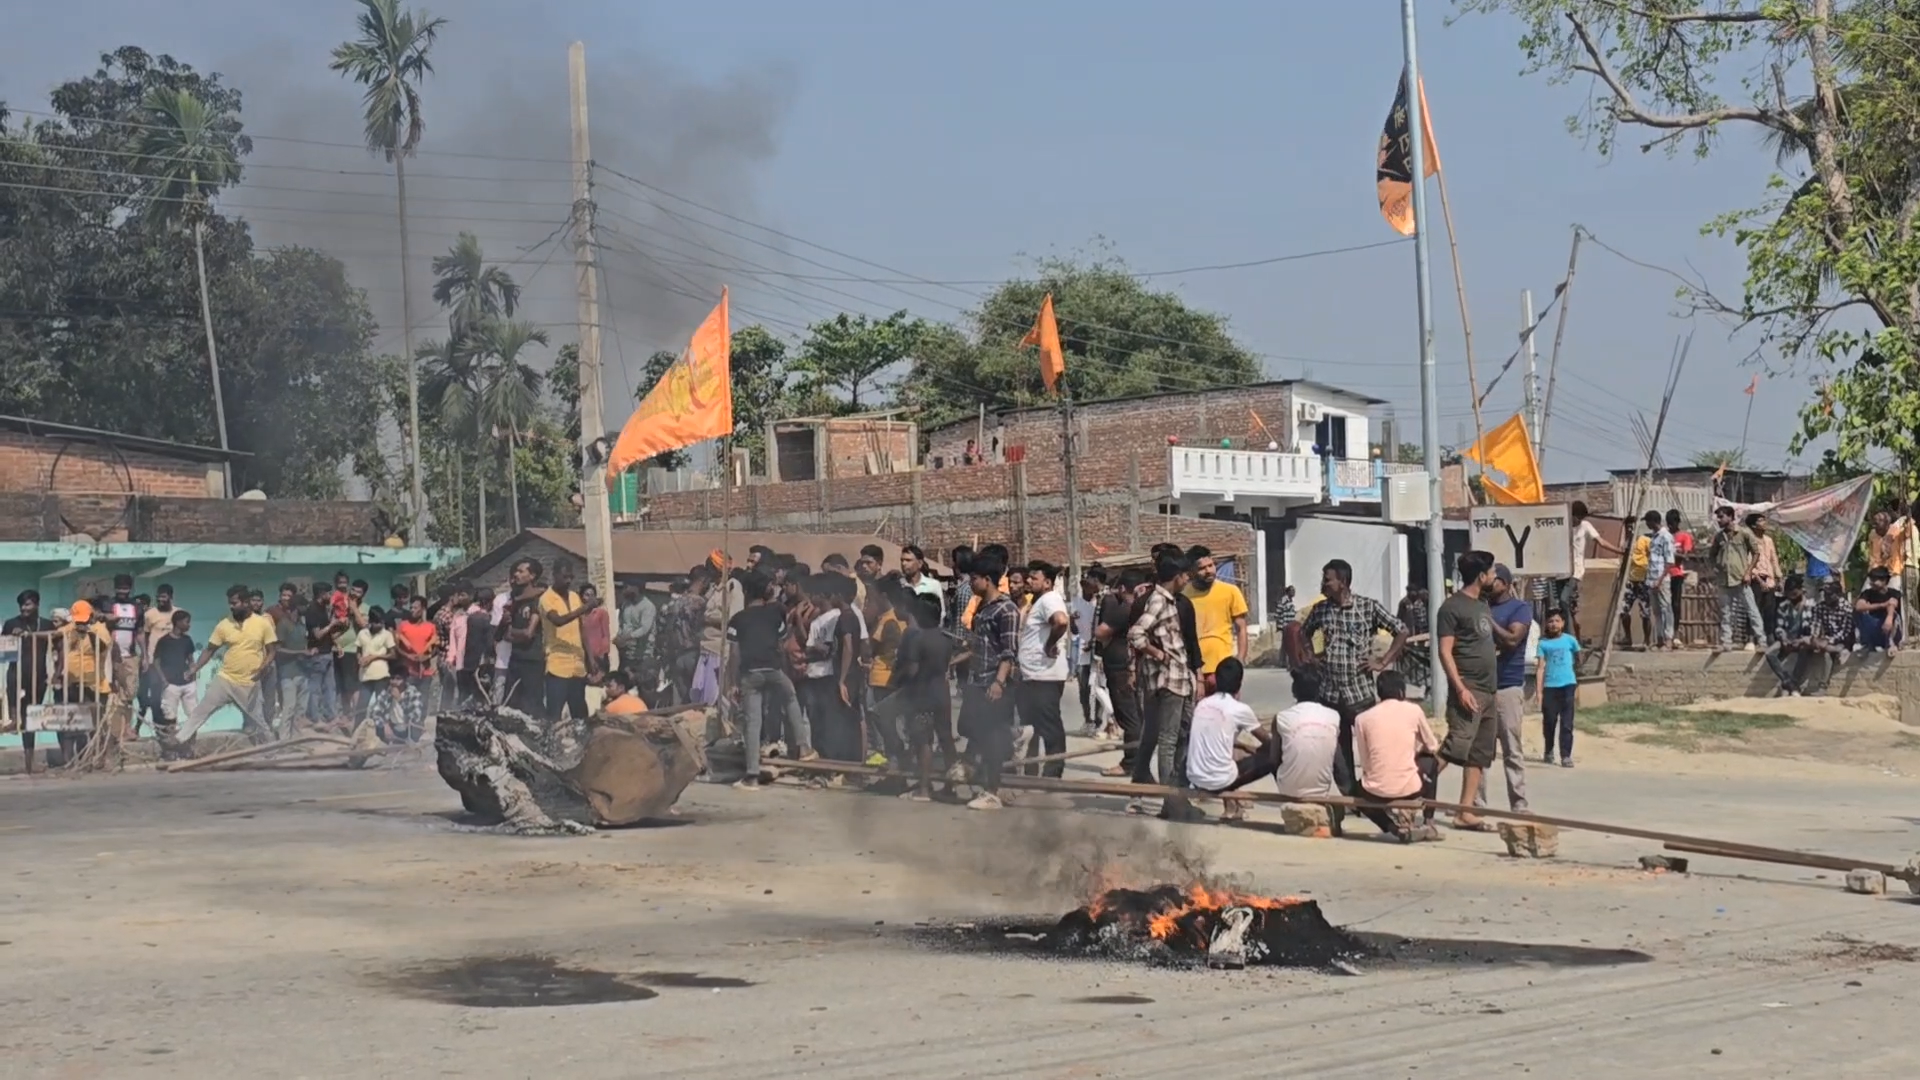 Sunsari’s Bhutaha gripped by Hindu-Muslim conflict: Over 51 rounds of gunfire, several injured